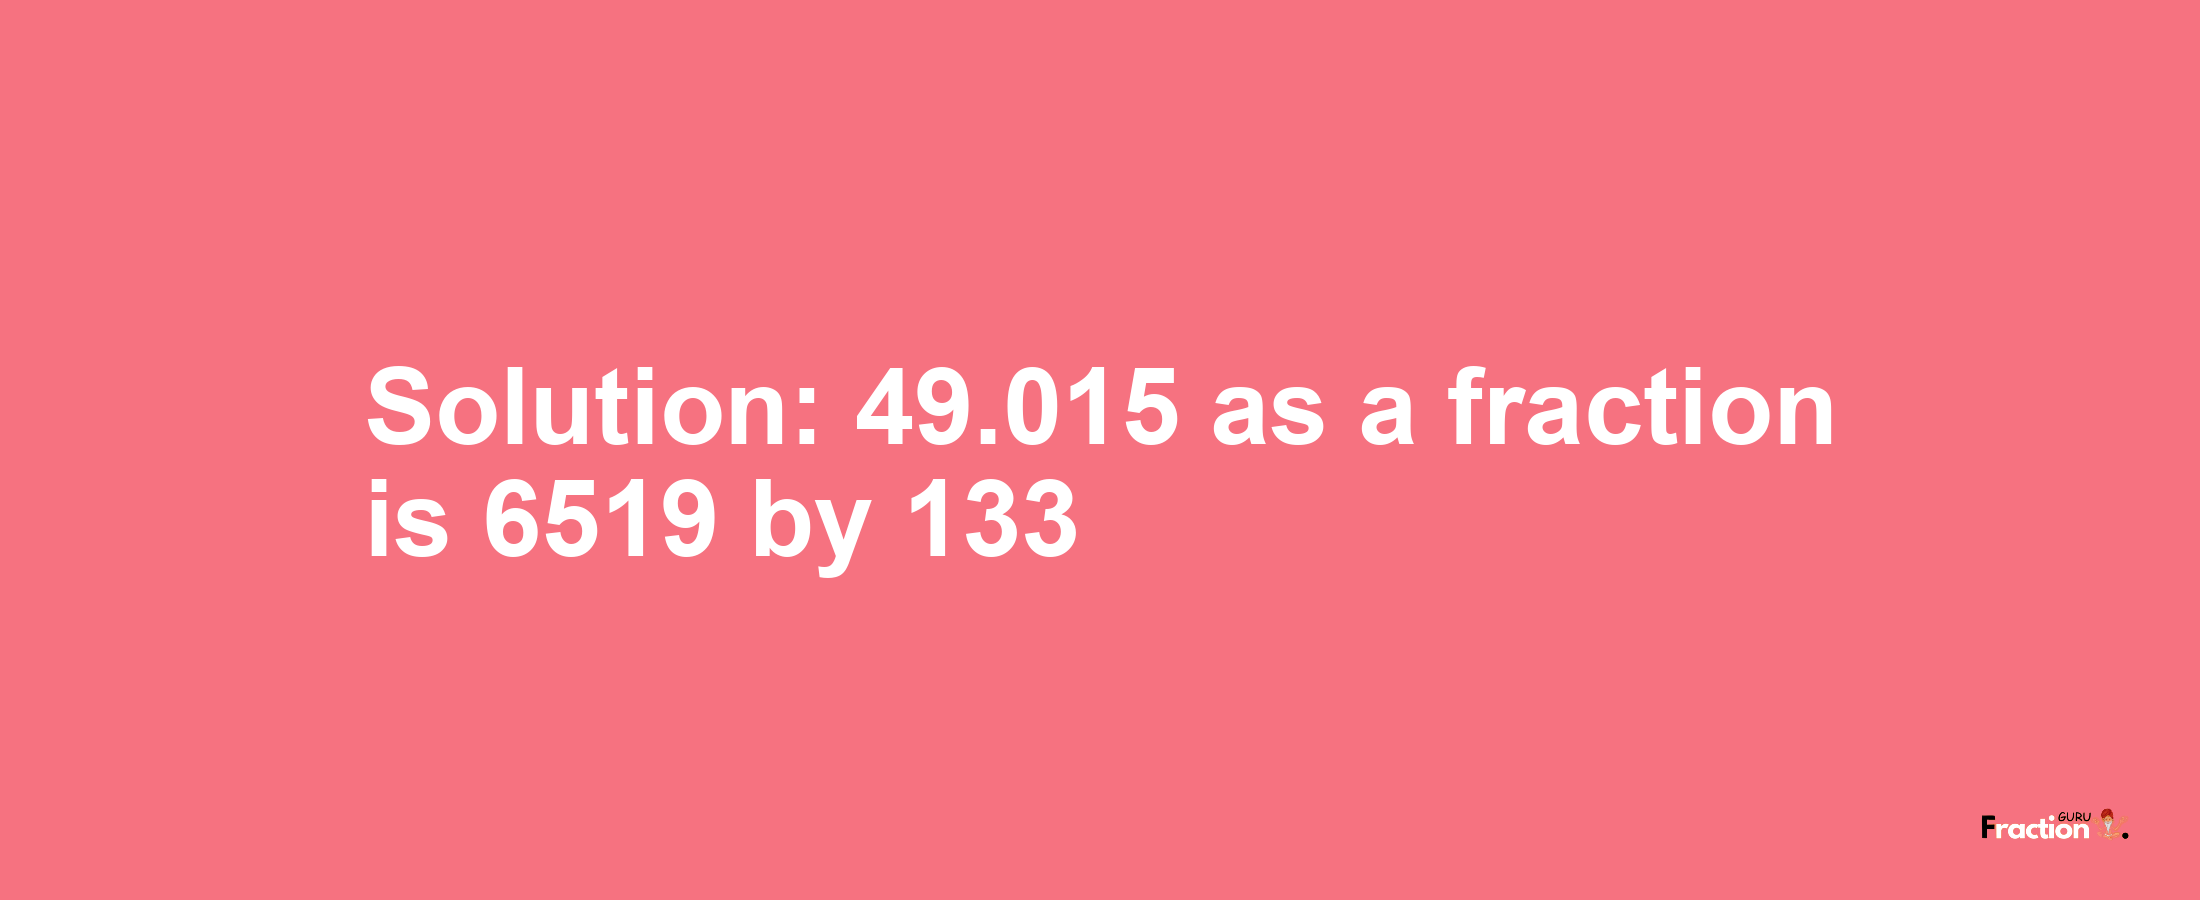 Solution:49.015 as a fraction is 6519/133